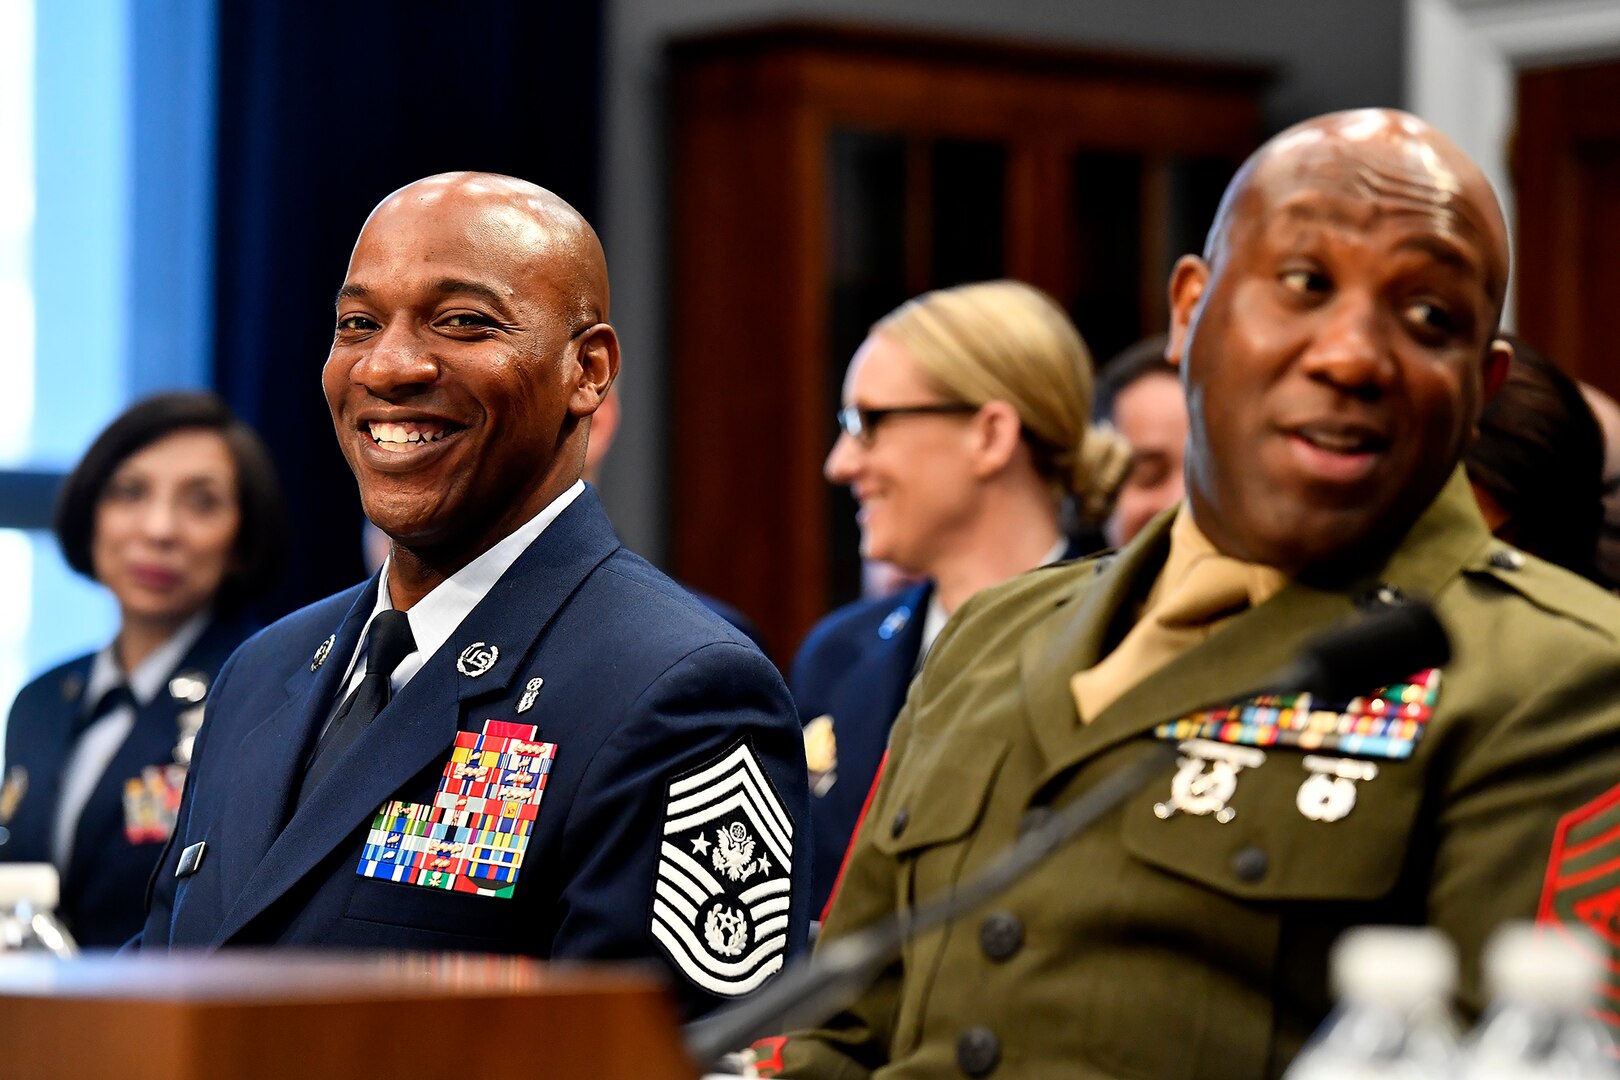 Chief Master Sgt. of the Air Force Kaleth Wright prepares to testify before the House Appropriations Subcommittee on Military Construction and Veterans Affairs in Washington, D.C., March 8, 2017.  The CMSAF was joined by his service counterparts for the hearing.